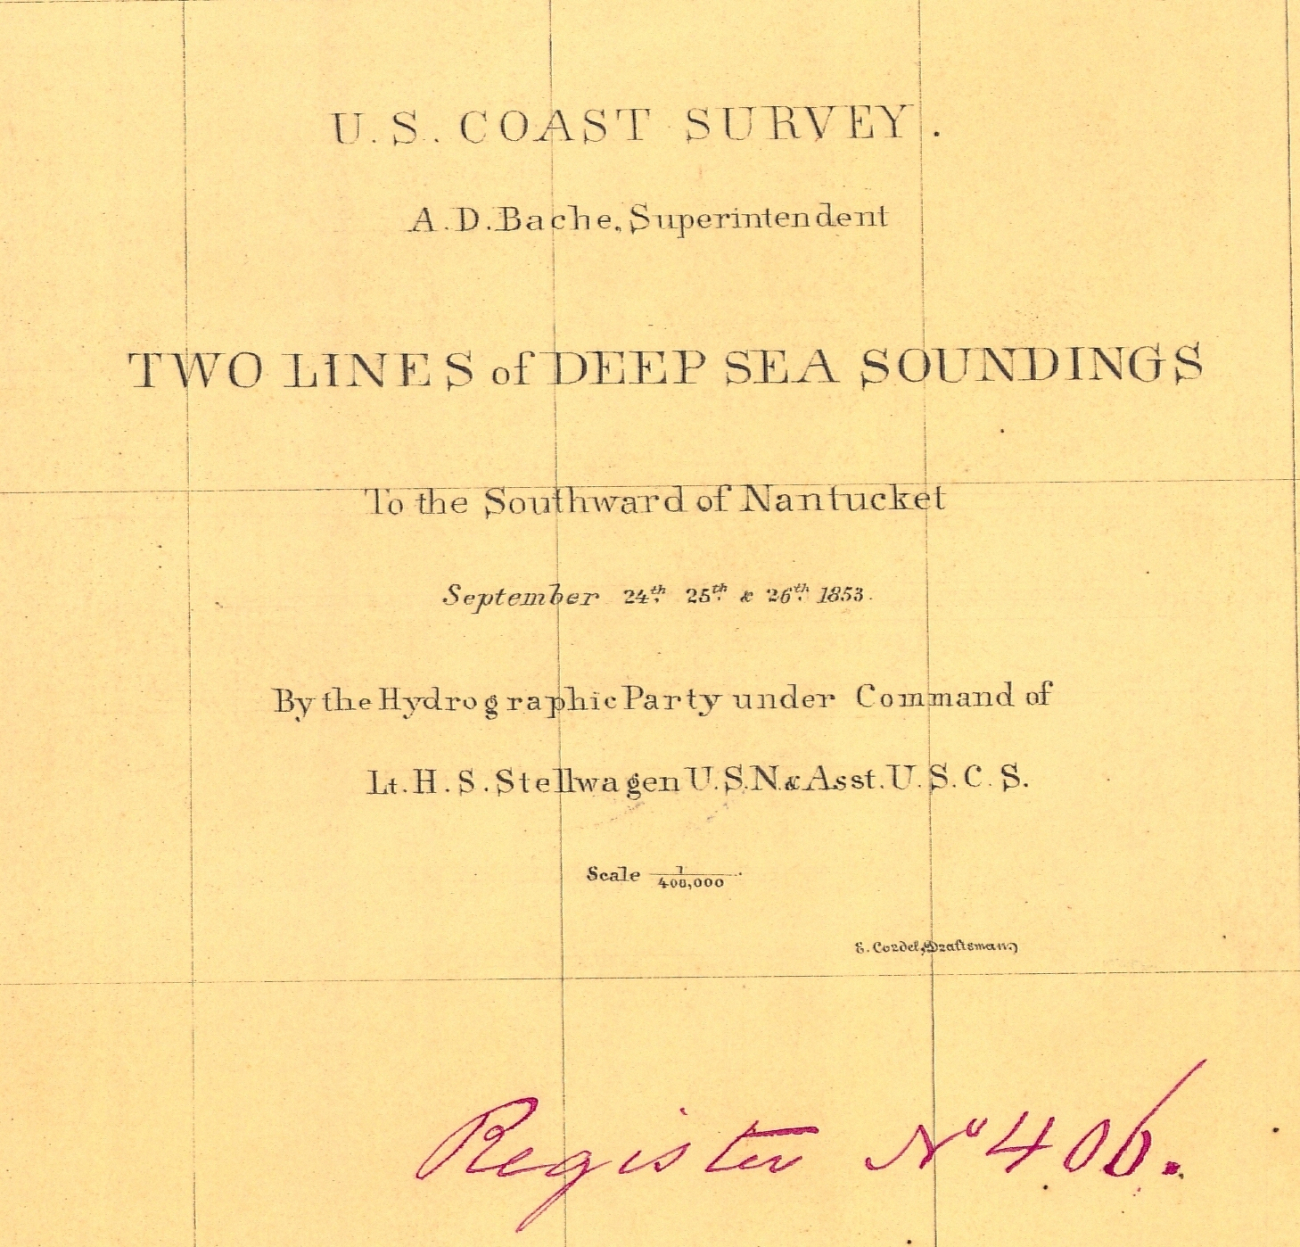 Title block of the hydrographic sheet H-406 of Two Lines of Deep SeaSoundings to the Southward of Nantucket